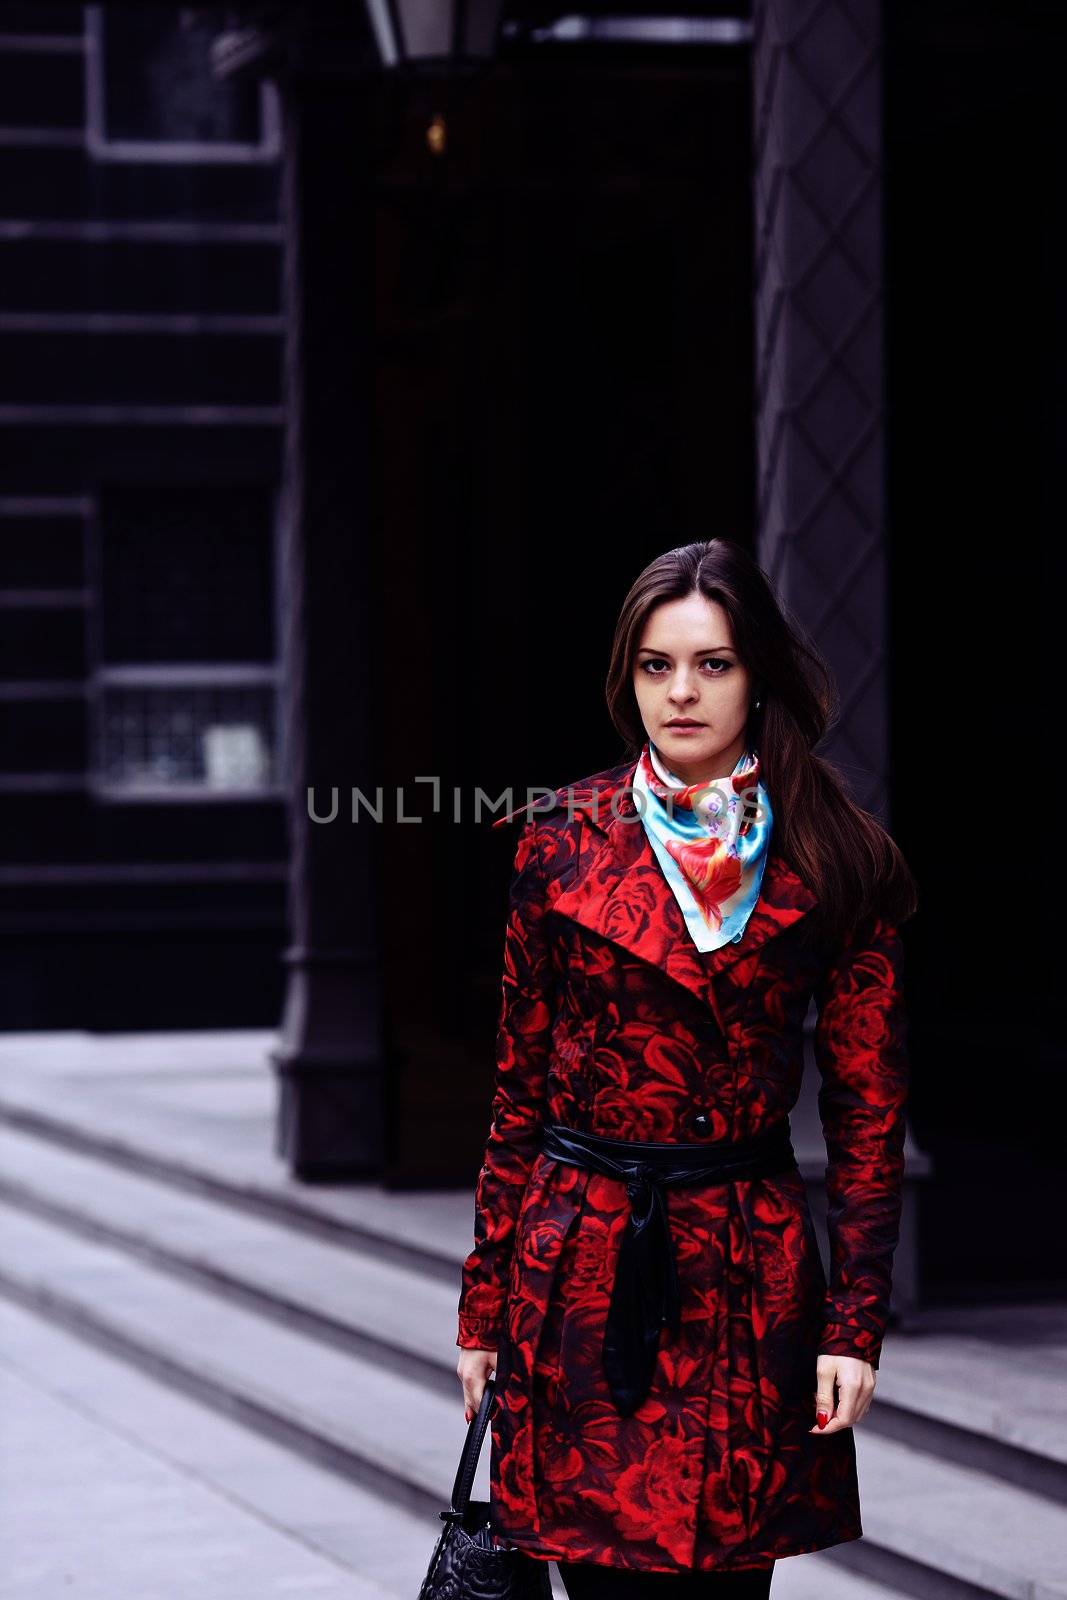 Beautiful business woman in a red cloak against expensive office building